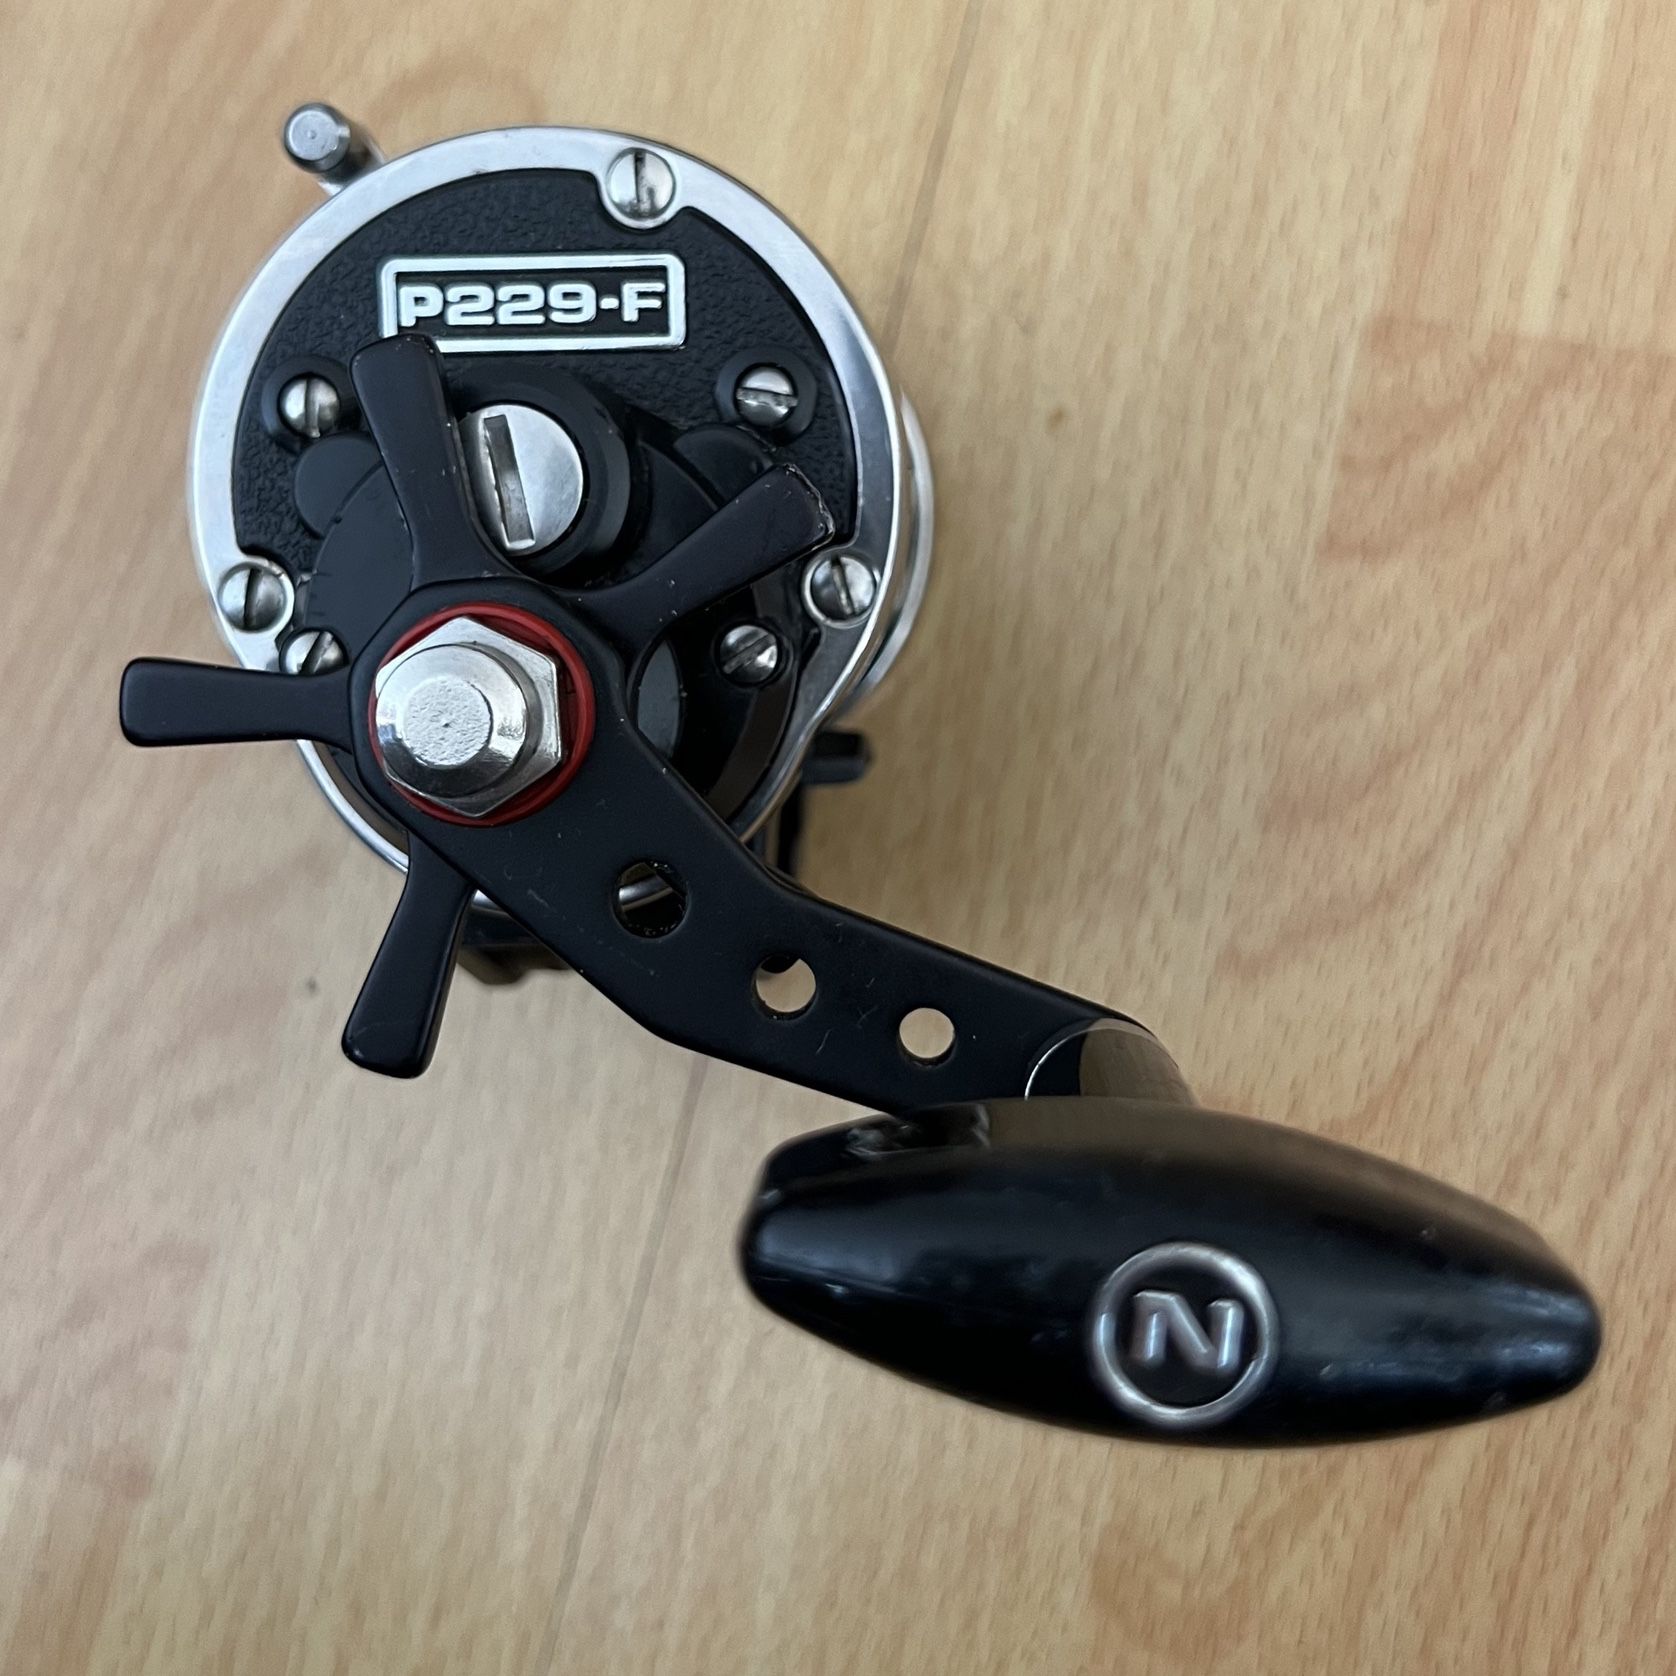 Newell P229F Fishing Reel for Sale in Los Angeles, CA - OfferUp